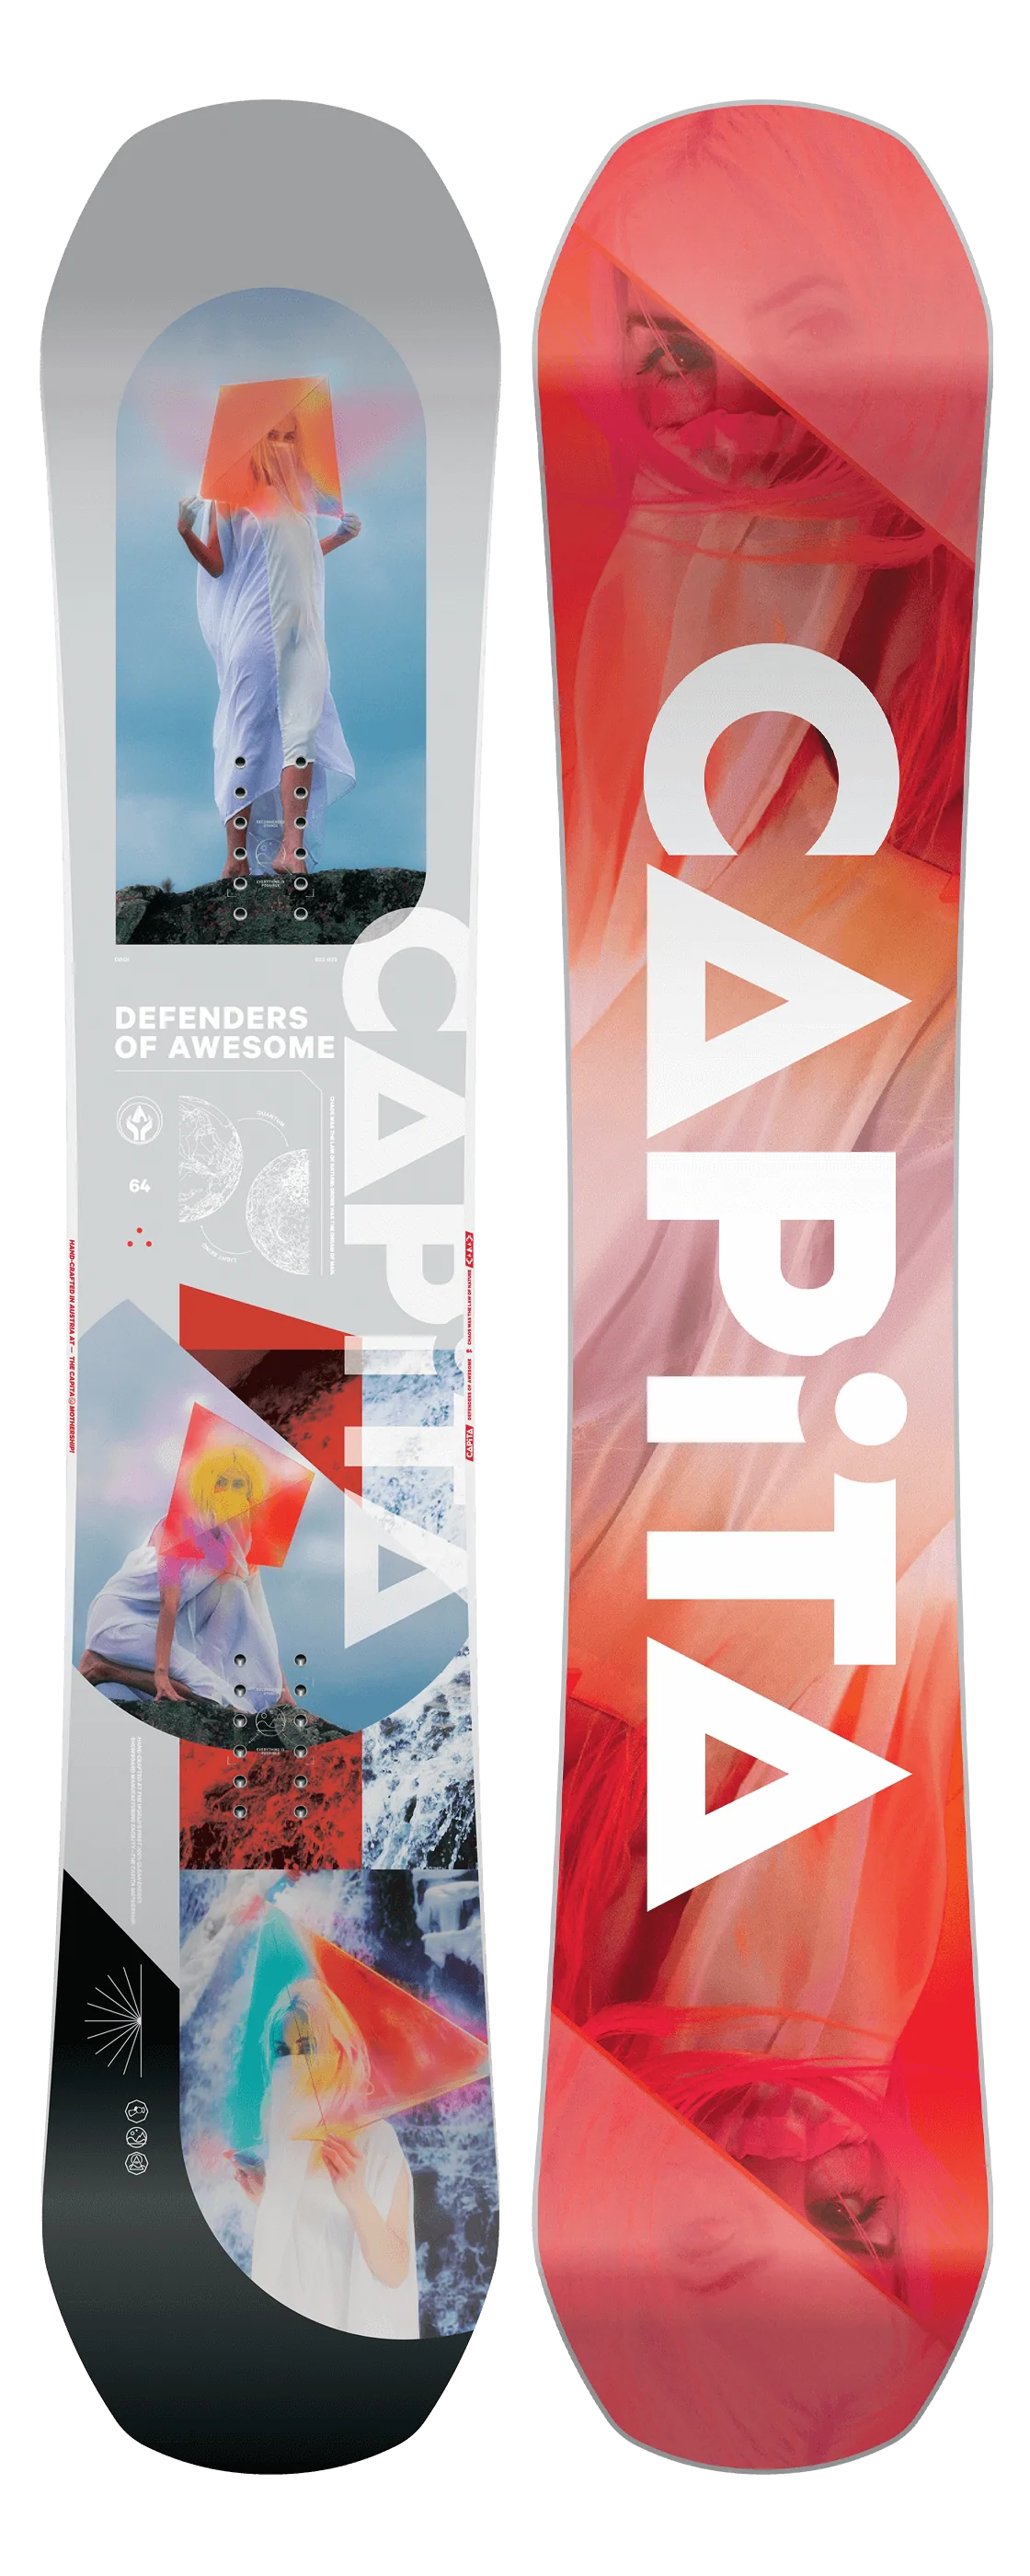 Capita D.O.A. (Defenders of Awesome) Snowboard 2023